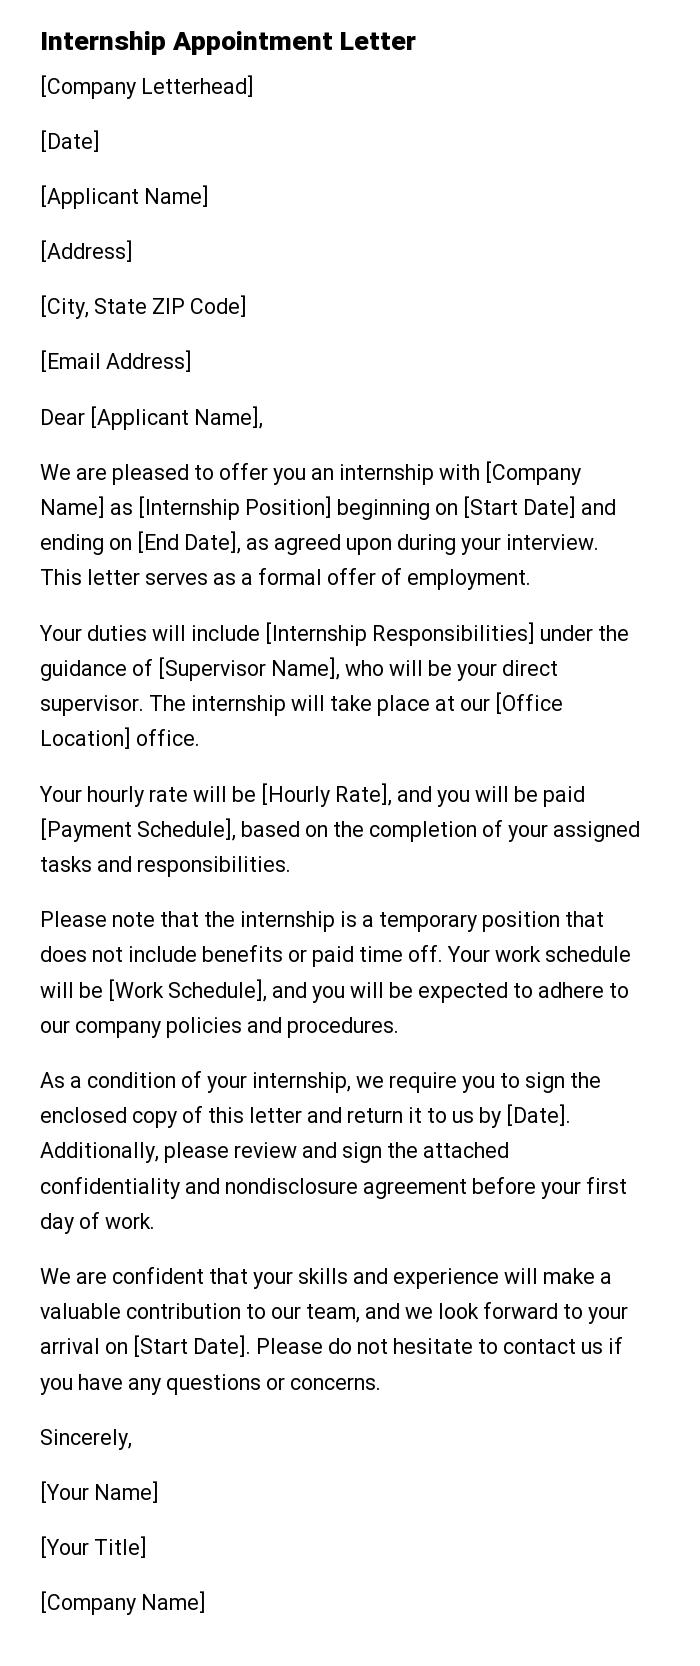 Internship Appointment Letter